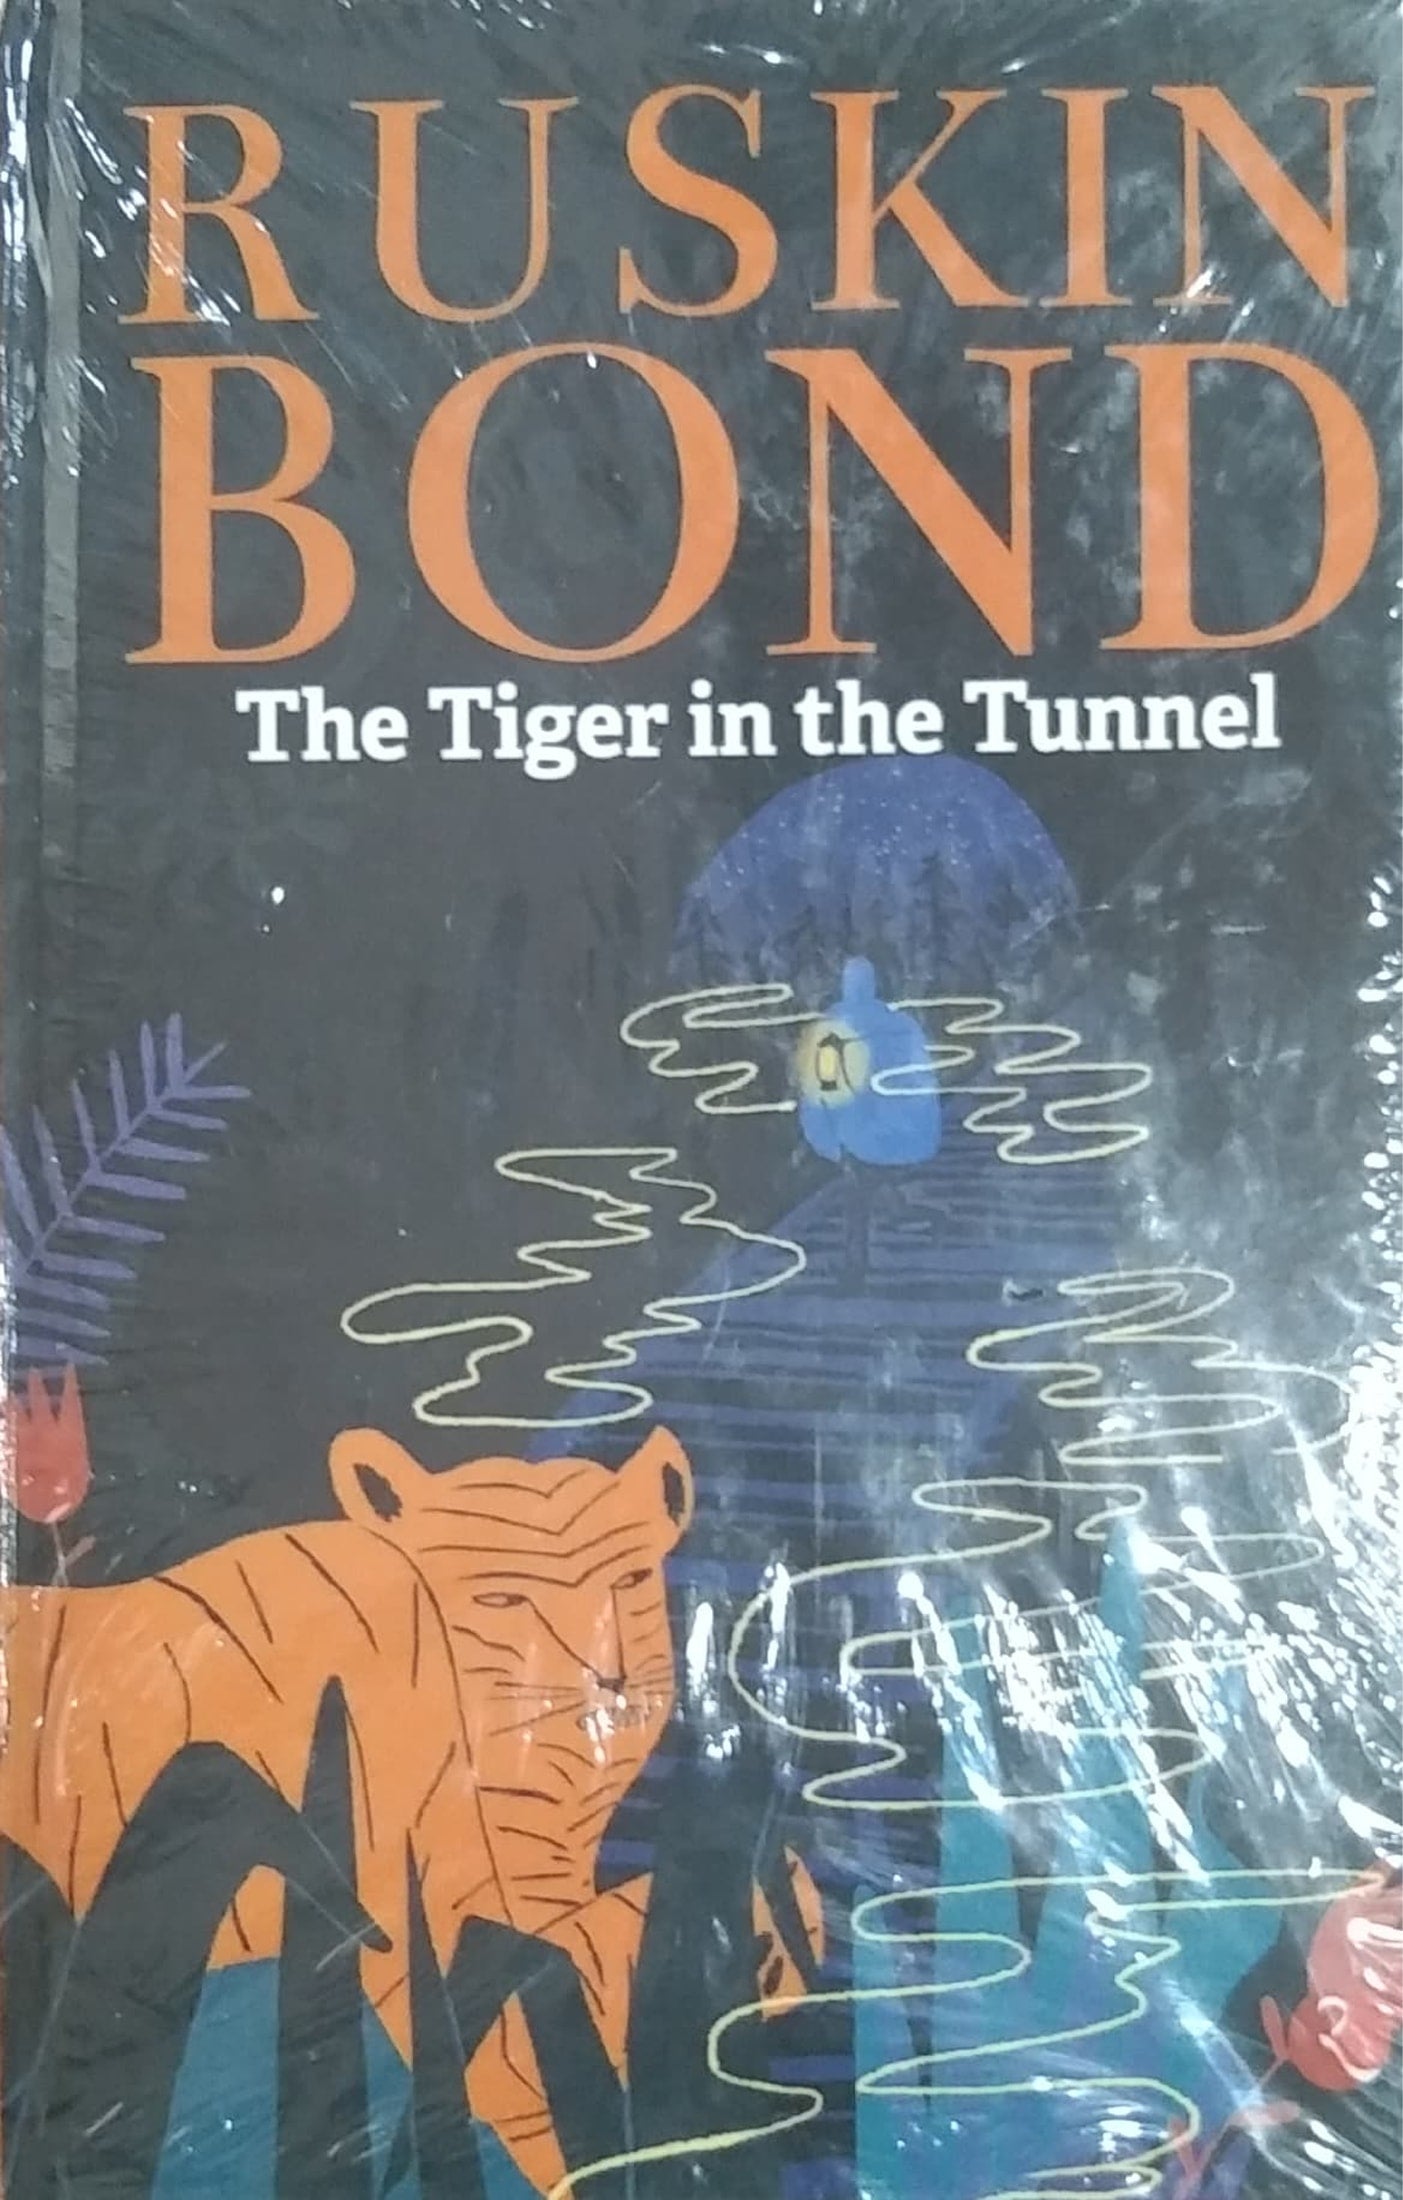 RUSKIN BOND - The Tiger in the Tunnel